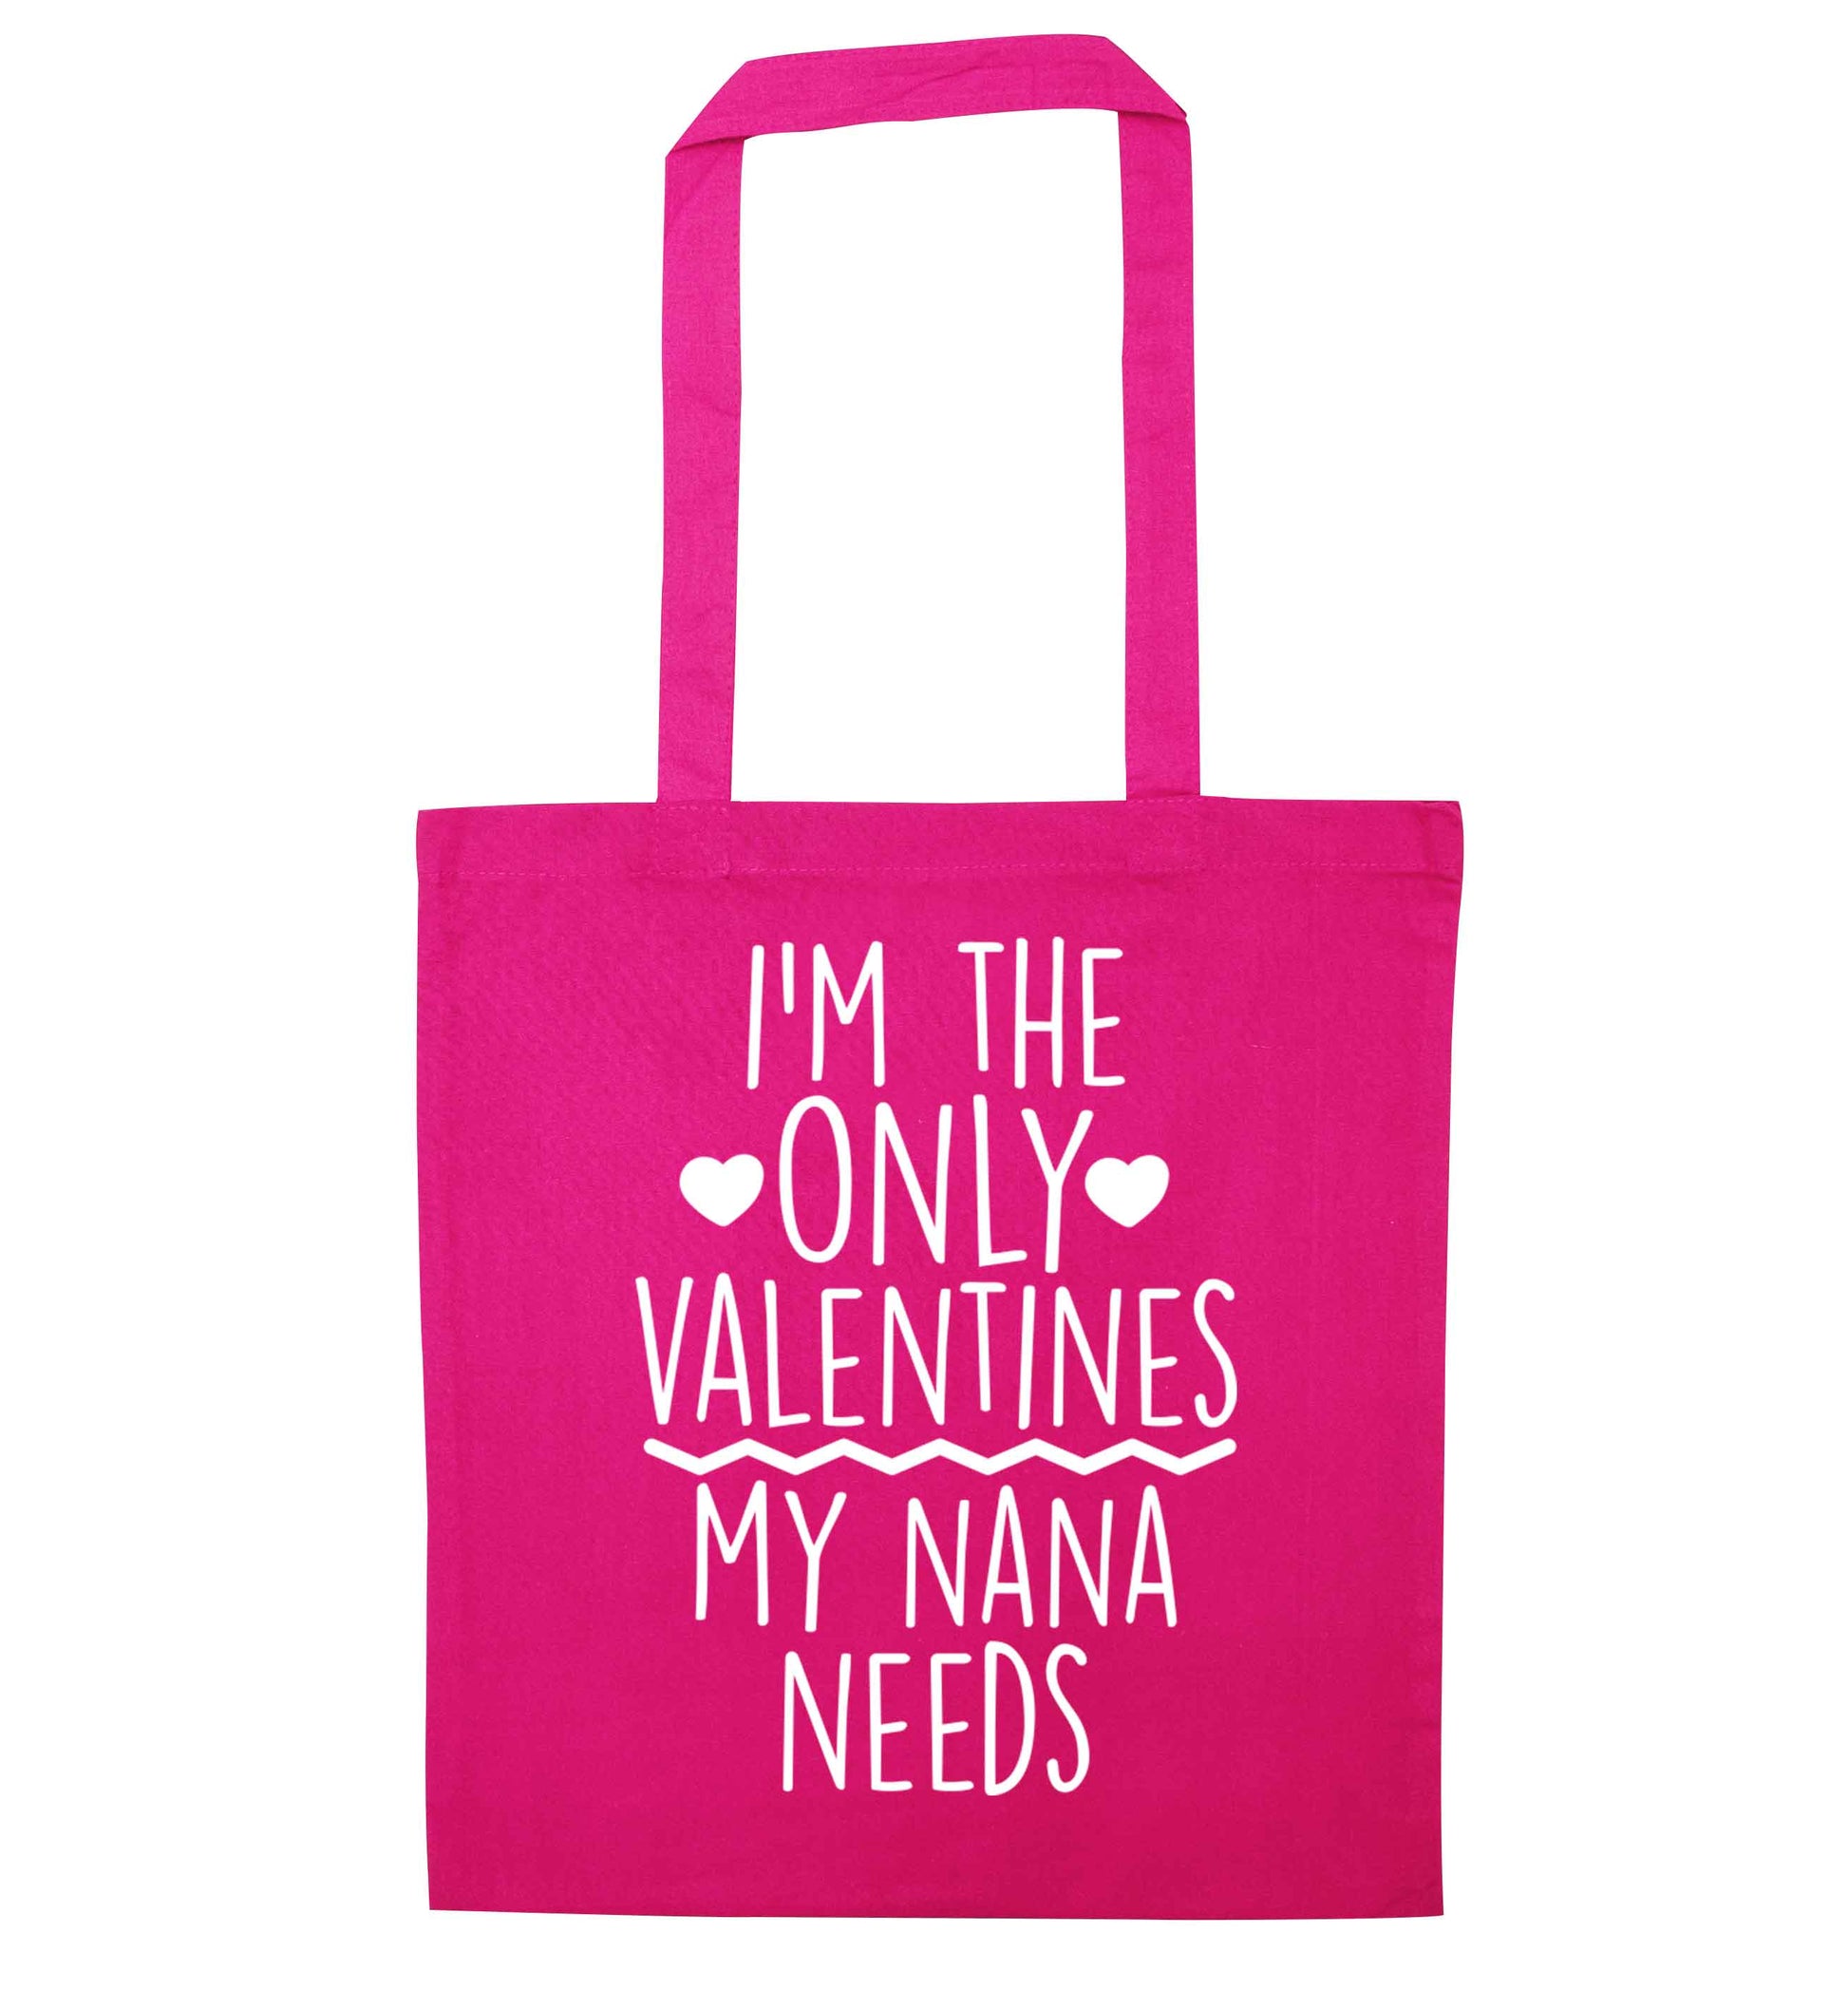 I'm the only valentines my nana needs pink tote bag